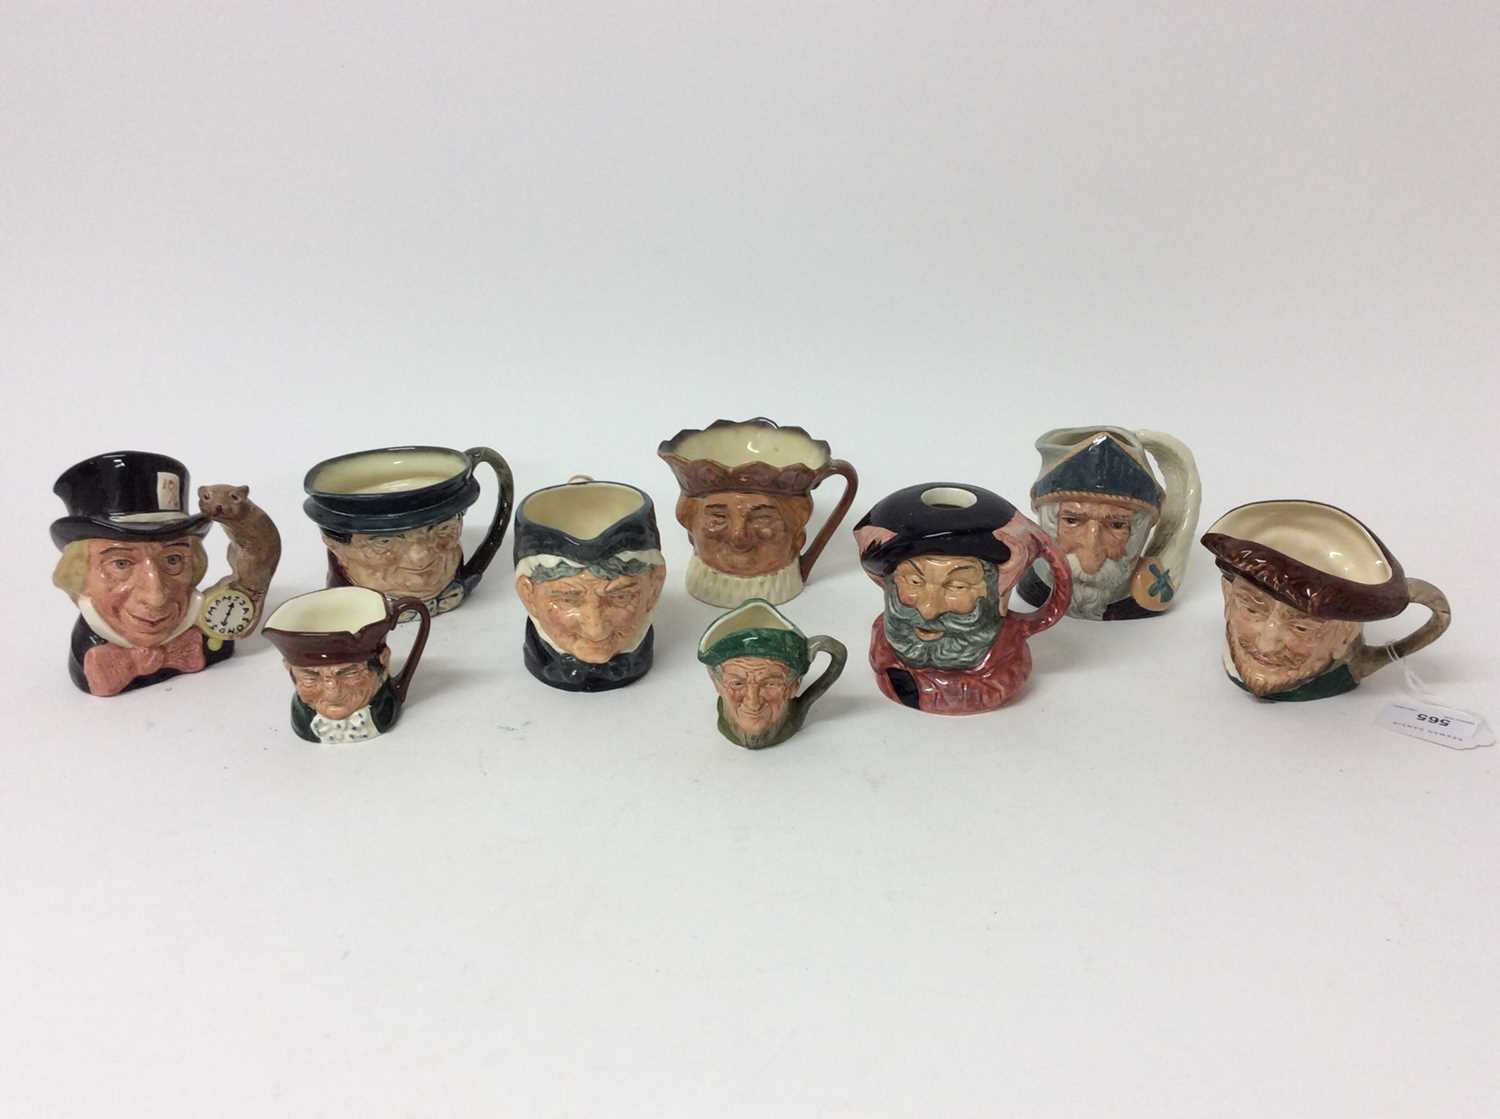 Lot 565 - Nine Royal Doulton character jugs - Drake, Tony Weller, Falstaff D6385, Mad Hatter D6602, Old King Cole, Granny D6384, Don Quixote D6460, Auld Mac D6253 and Old Charley D6046